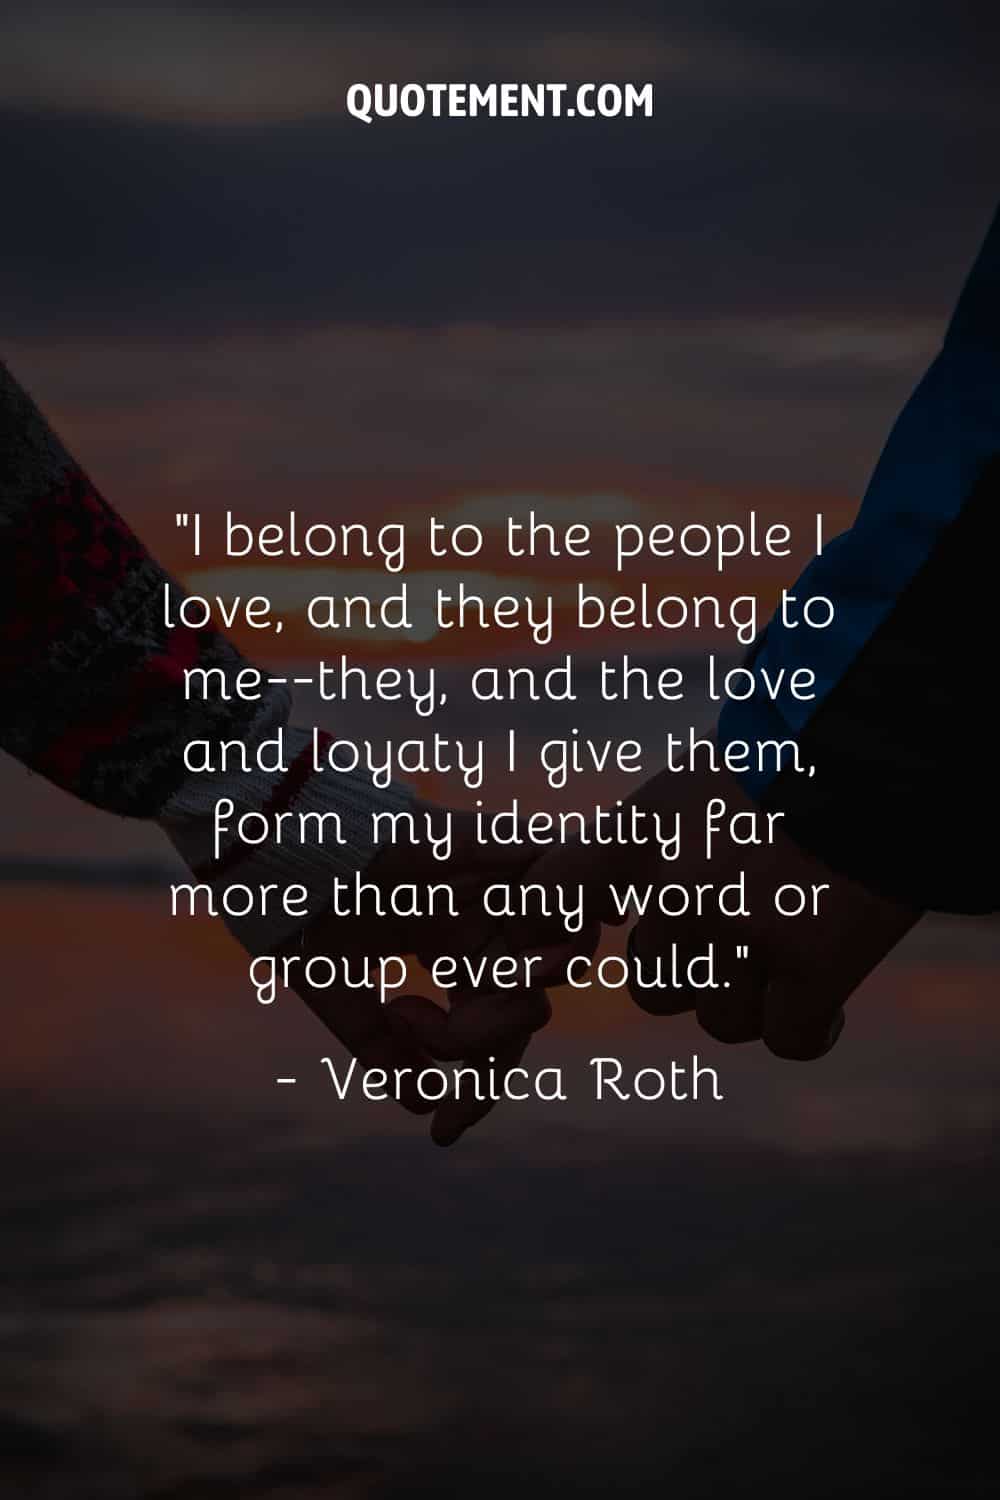 “I belong to the people I love, and they belong to me--they, and the love and loyaty I give them, form my identity far more than any word or group ever could